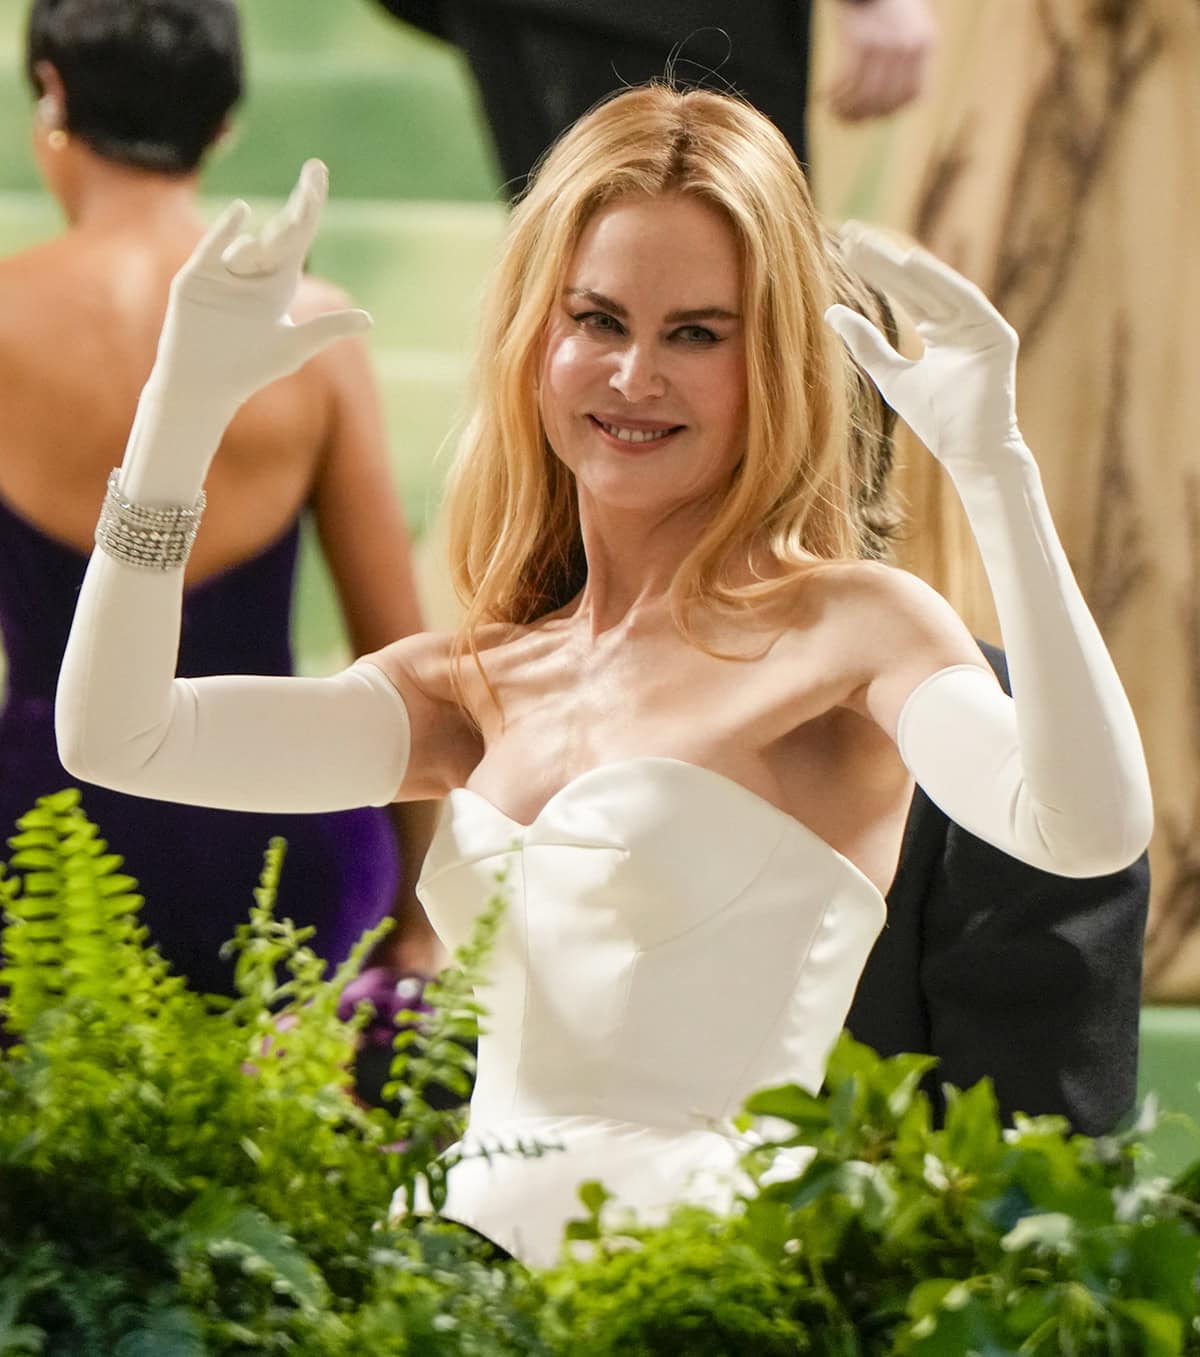 Nicole Kidman elegantly styles her Balenciaga gown with white opera gloves and jewelry by Harry Winston, including the Cluster Diamond Earrings and the Secret Combination Platinum and Diamond Bracelet